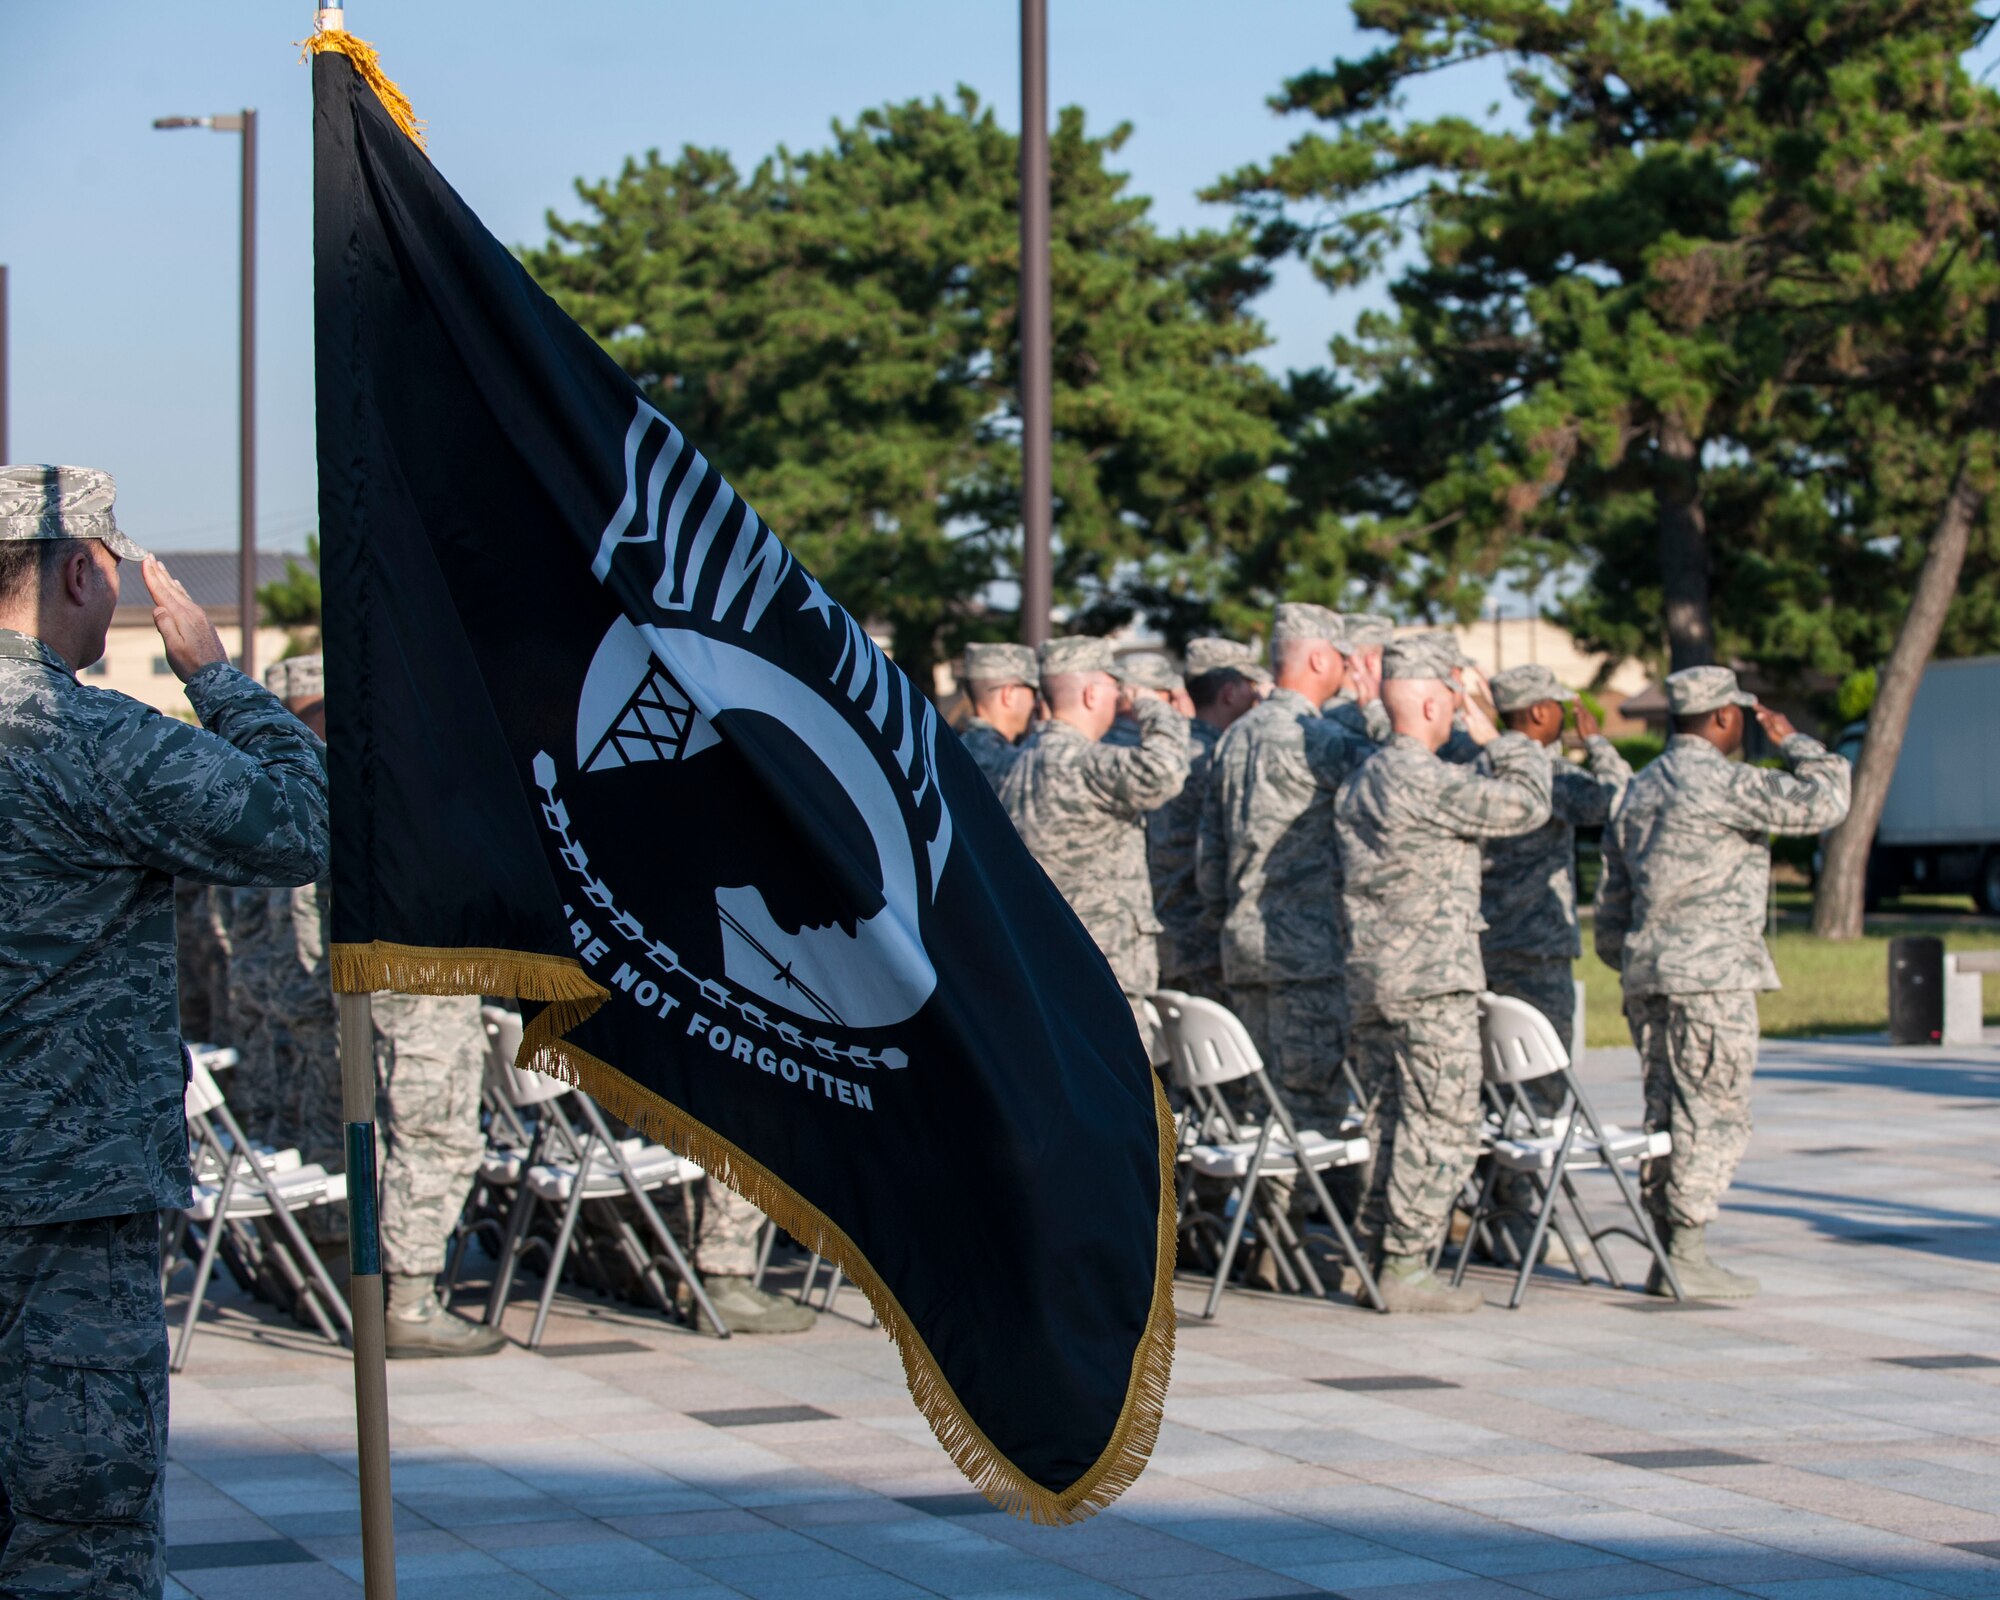 U.S. Air Force Airmen render a salute during the opening ceremony of Prisoner of War and Missing in Action Recognition Day at Kunsan Air Base, Republic of Korea, Sept. 14, 2017. In the U.S., this day is observed annually on the third Friday in September to honor those who were prisoners of war and those who are still missing in action. According to the Defense POW/MIA Accounting Agency, there are still 82,467 Americans still missing from past conflicts dating back to World War II. (U.S. Air Force photo by Staff Sgt. Victoria H. Taylor)